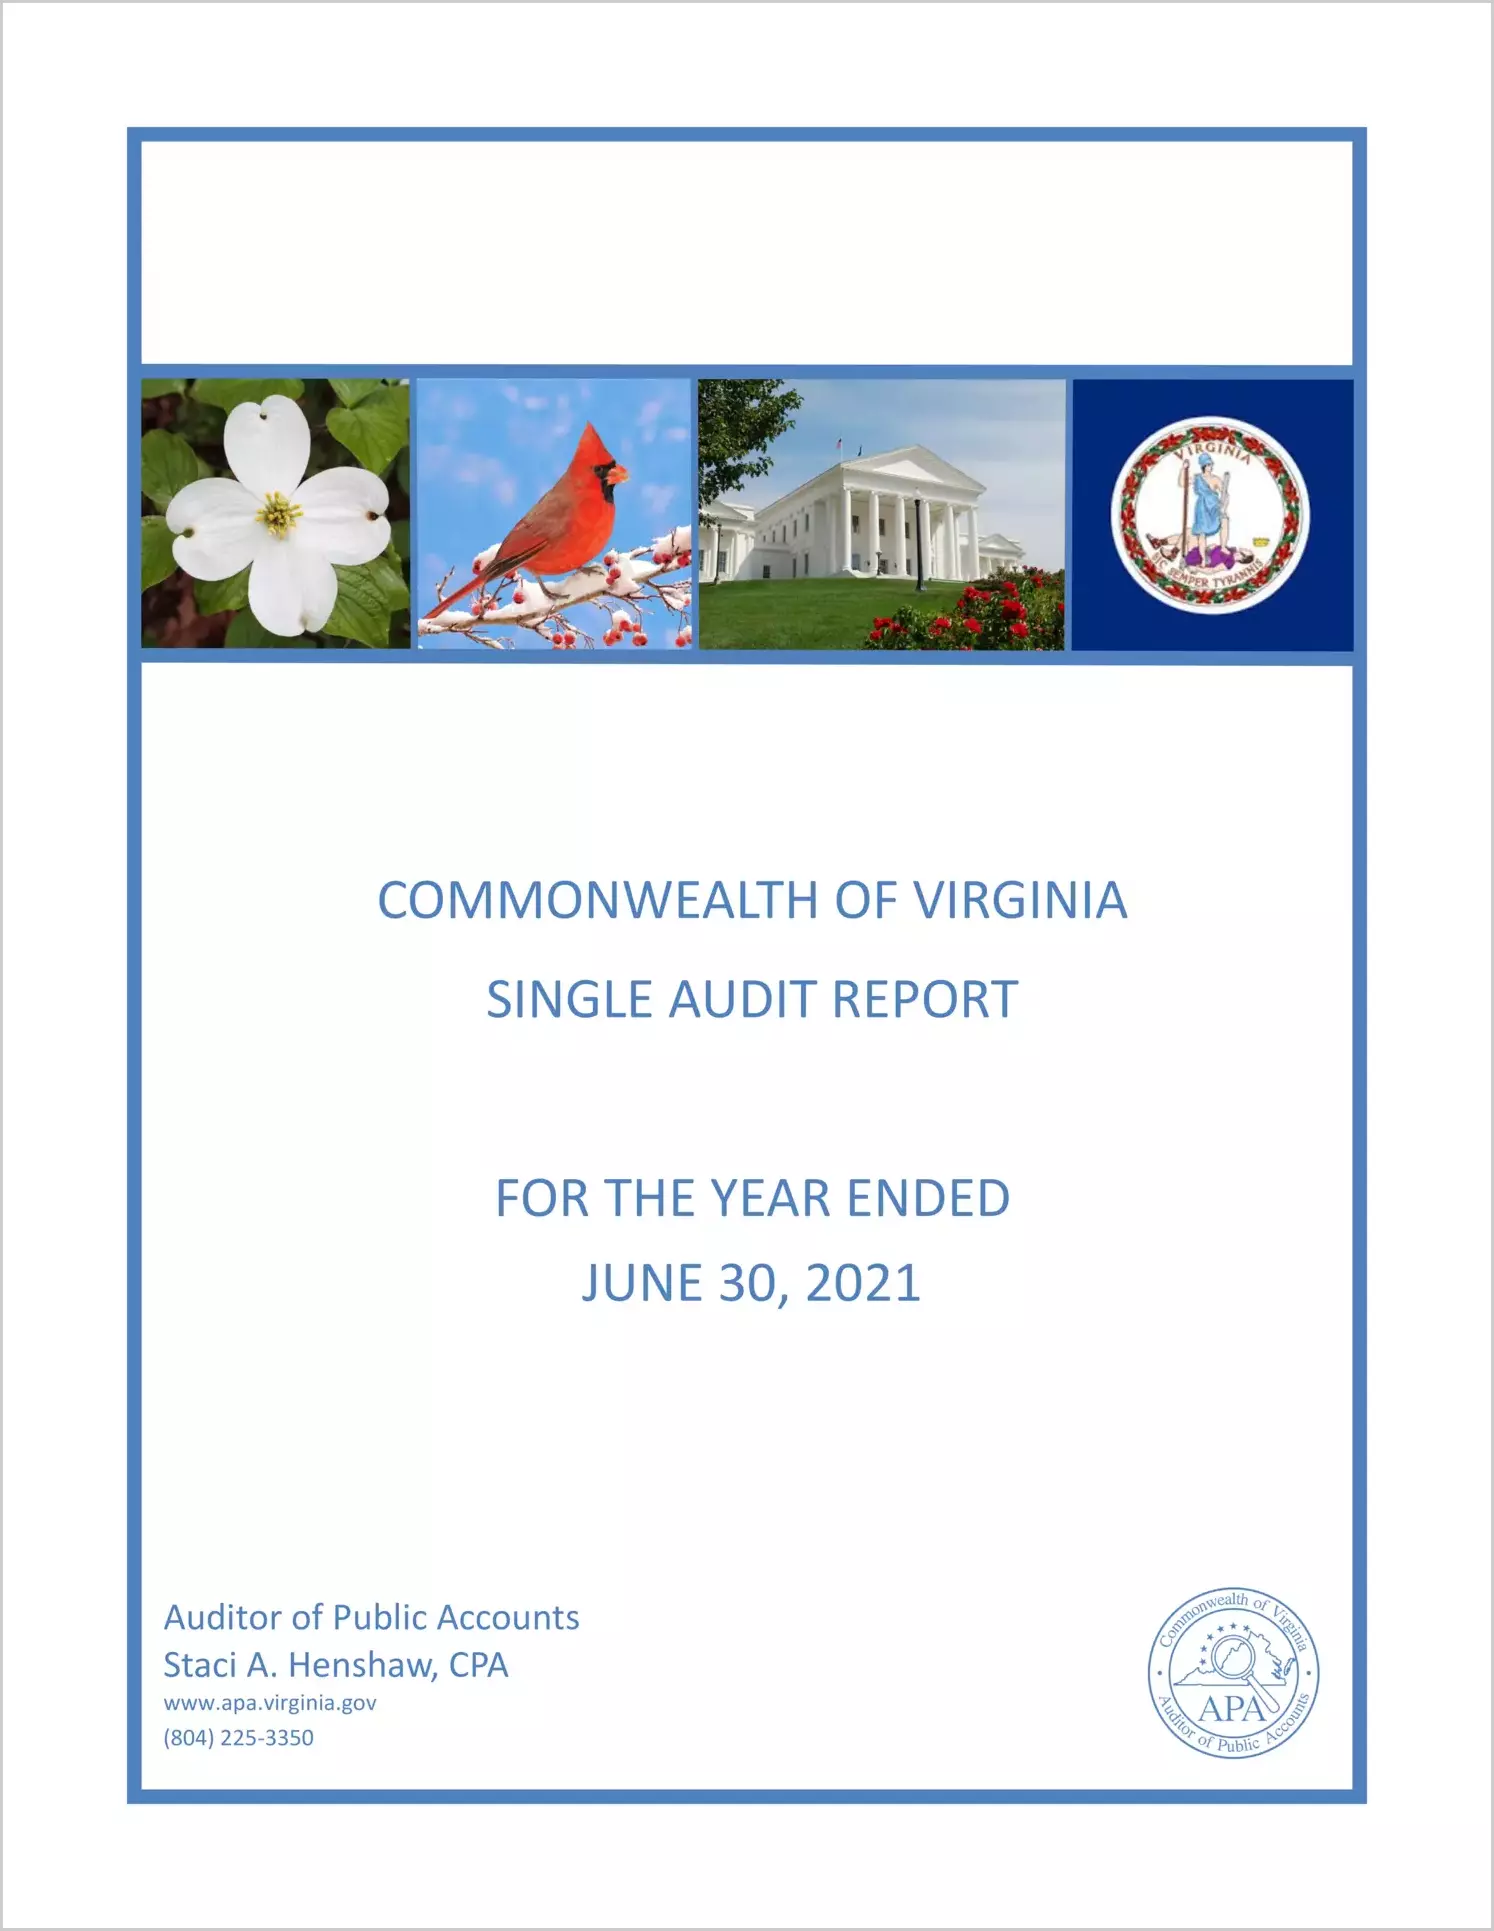 Commonwealth of Virginia Single Audit Report for the Year Ended June 30, 2021